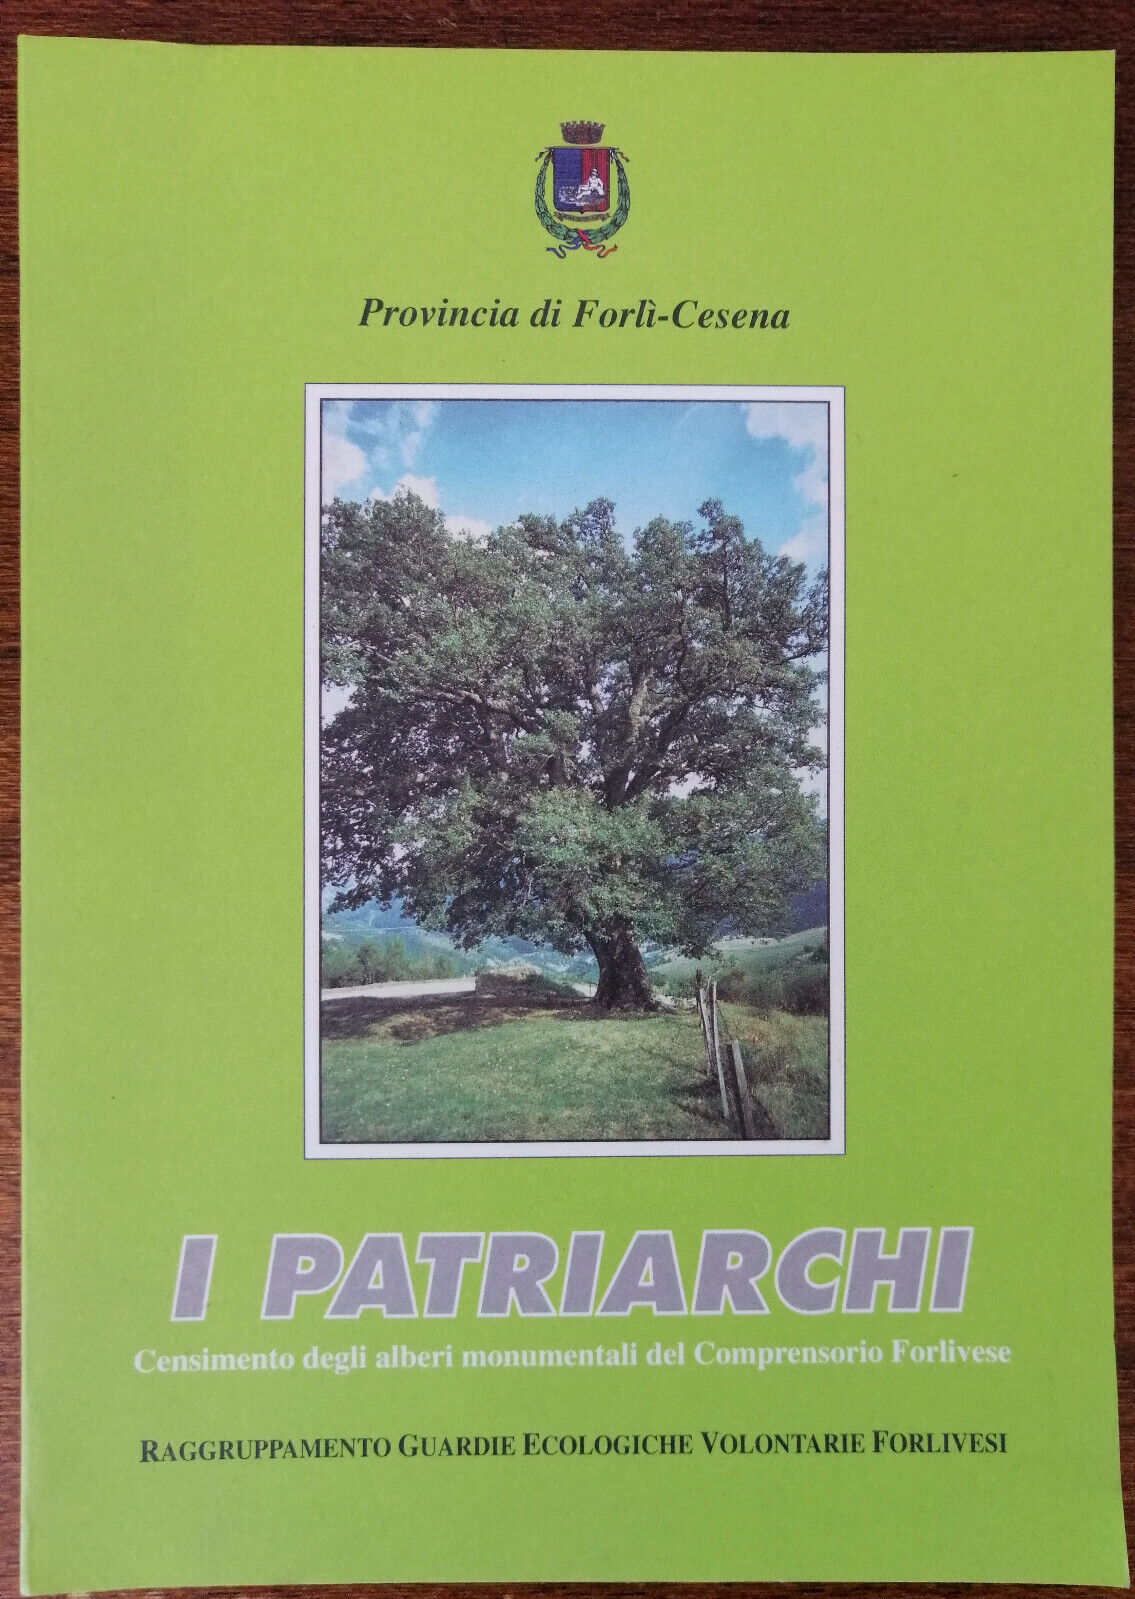 I patriarchi - AA.VV. - Guardie ecologiche volontarie forlivesi, 1999 - A